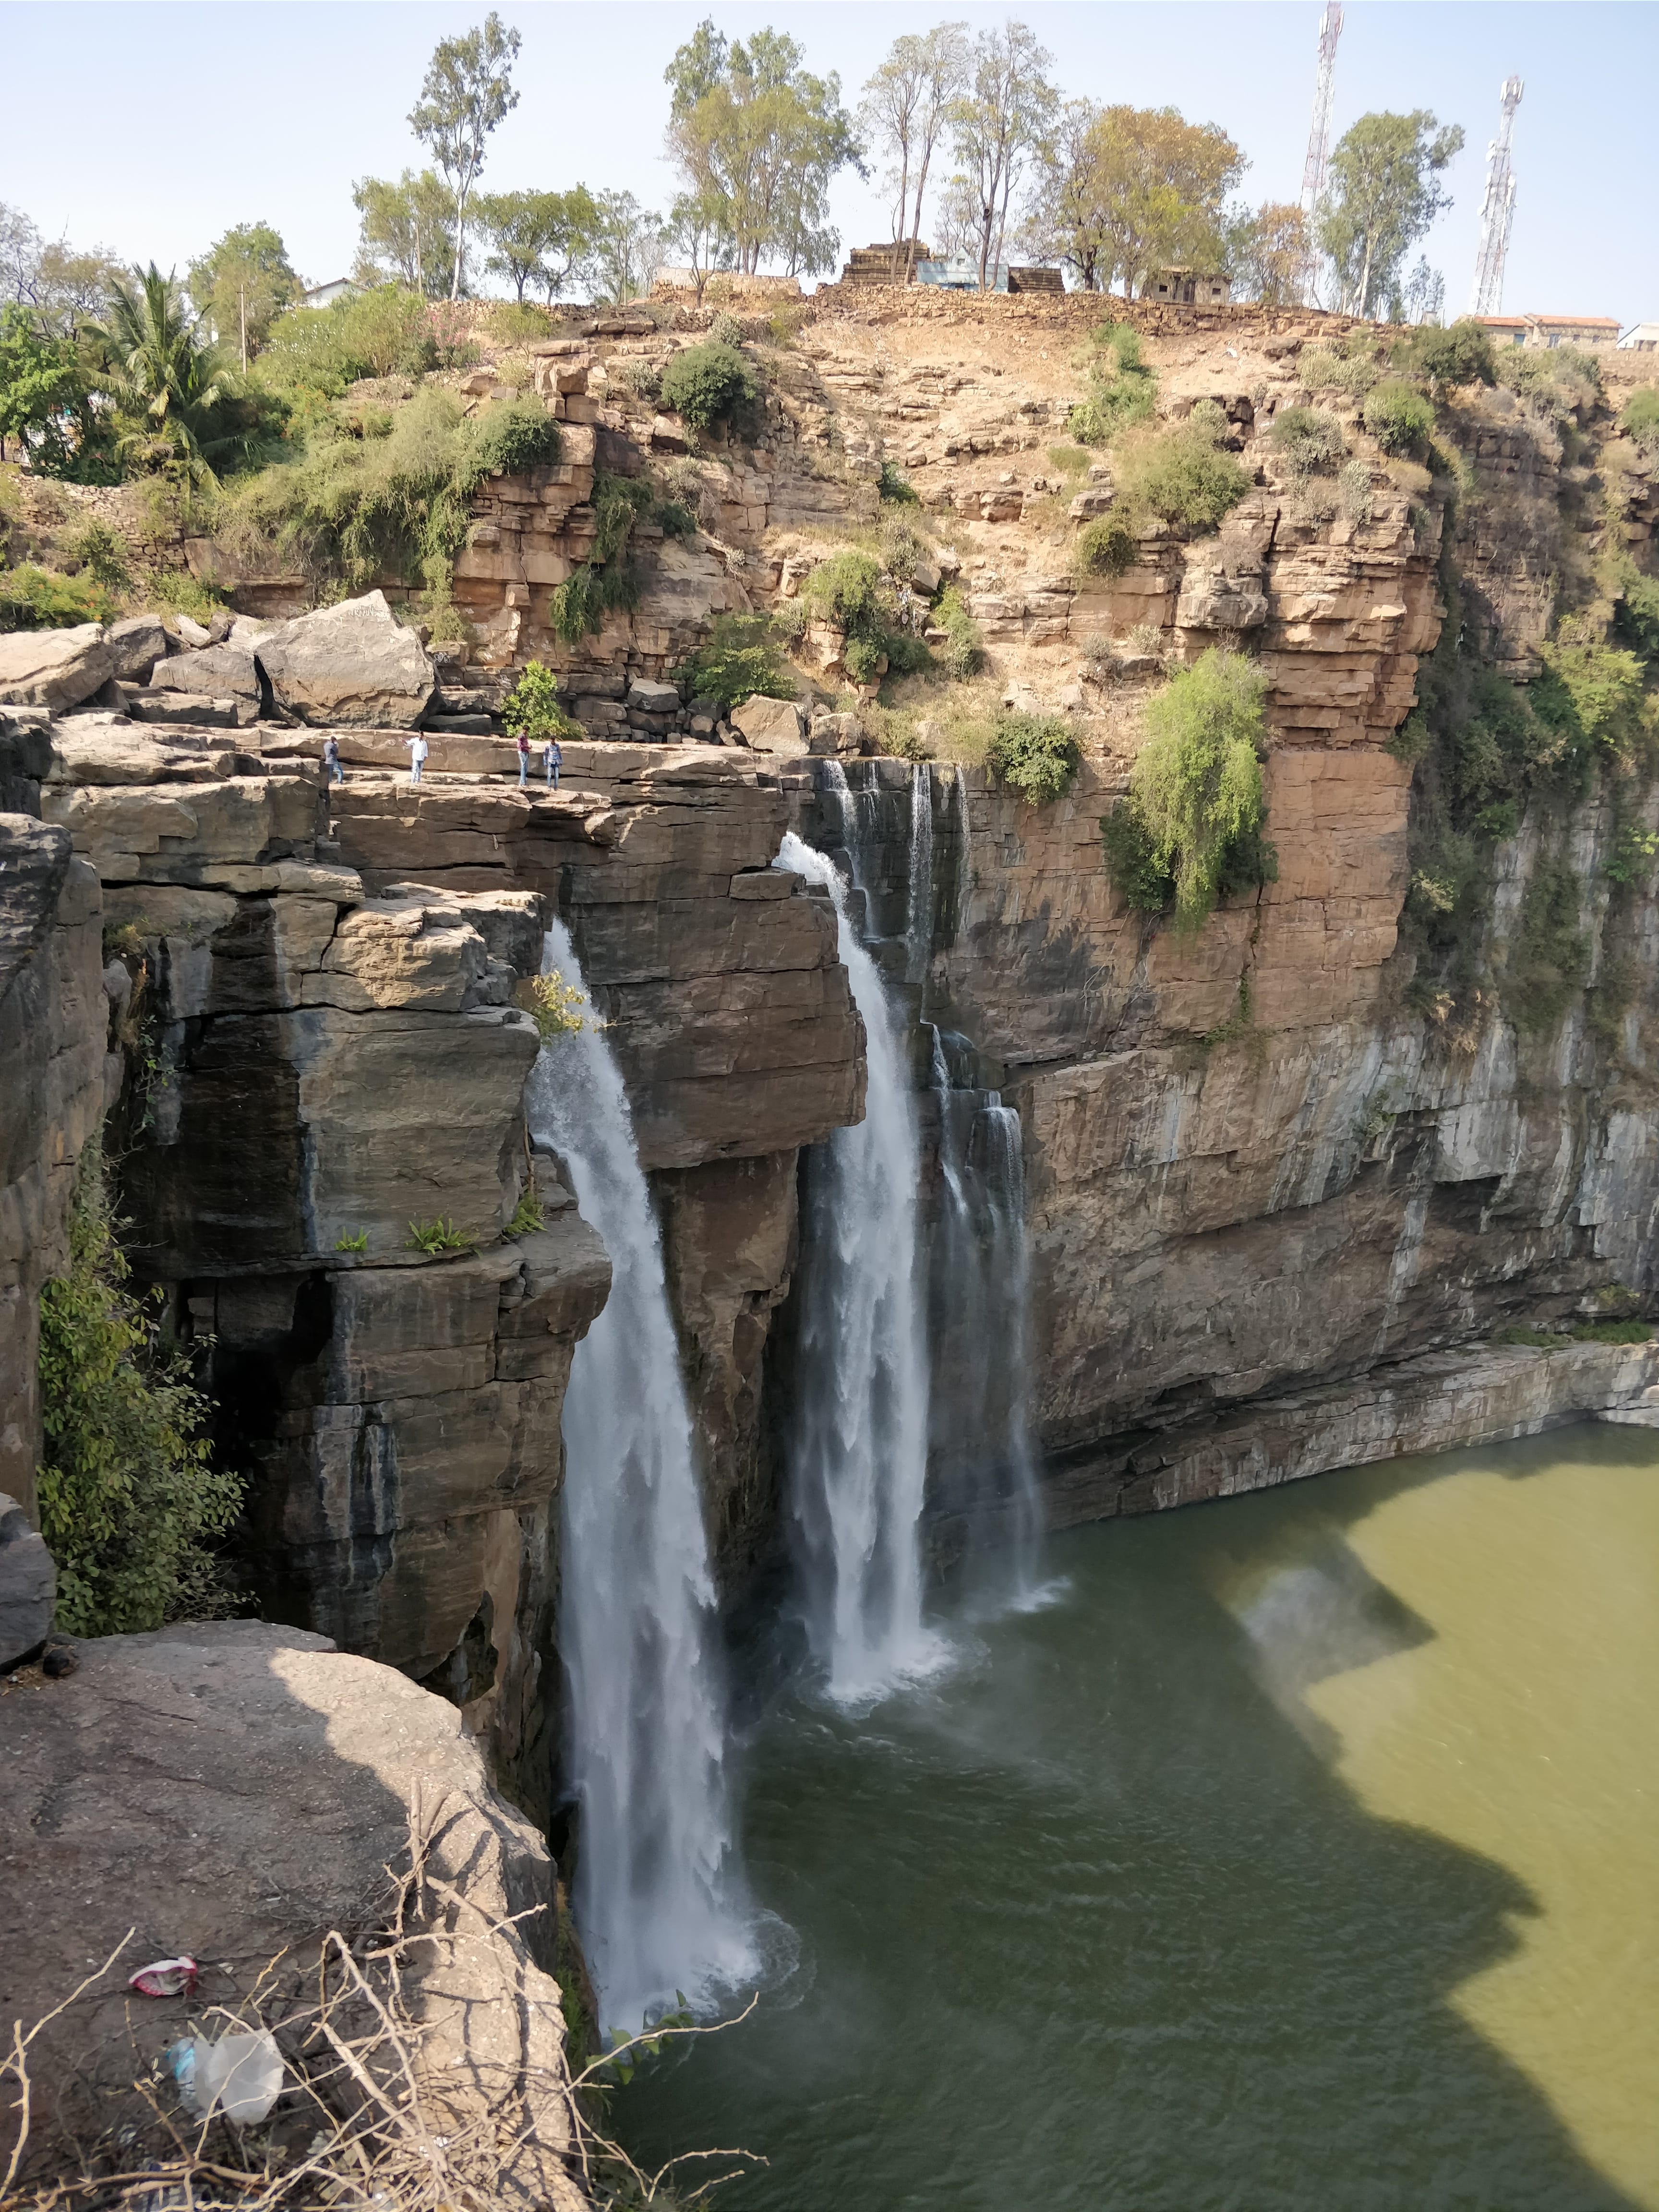 Gokak falls - view from the top